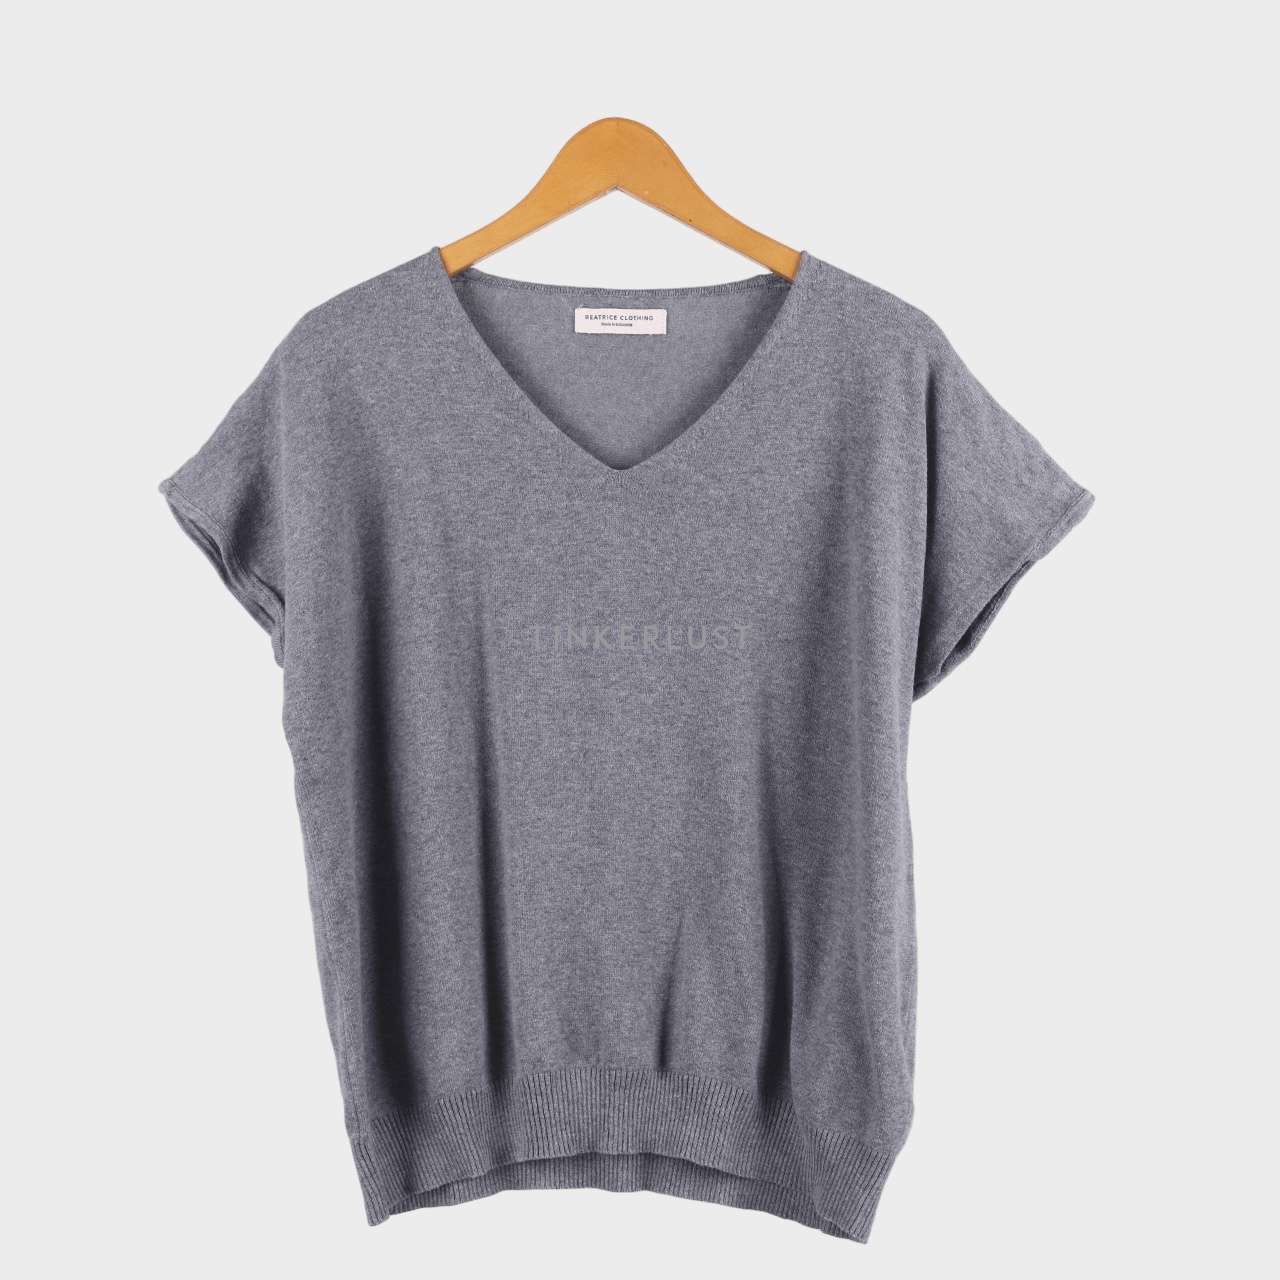 Beatrice Clothing Grey Knit Blouse